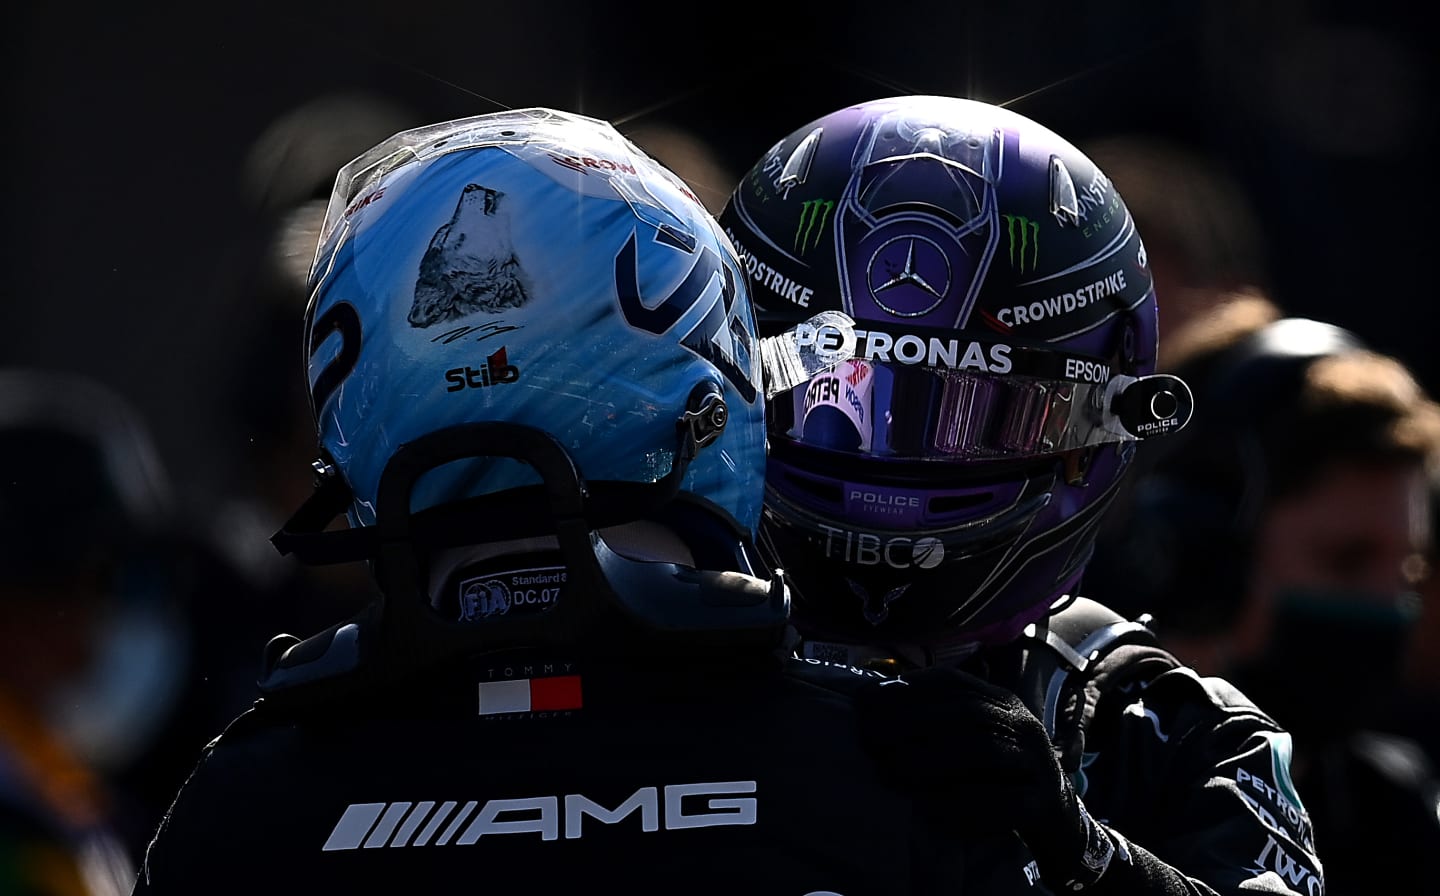 MEXICO CITY, MEXICO - NOVEMBER 06: Pole position qualifier Valtteri Bottas of Finland and Mercedes GP and second place qualifier Lewis Hamilton of Great Britain and Mercedes GP celebrate in parc ferme during qualifying ahead of the F1 Grand Prix of Mexico at Autodromo Hermanos Rodriguez on November 06, 2021 in Mexico City, Mexico. (Photo by Clive Mason/Getty Images)